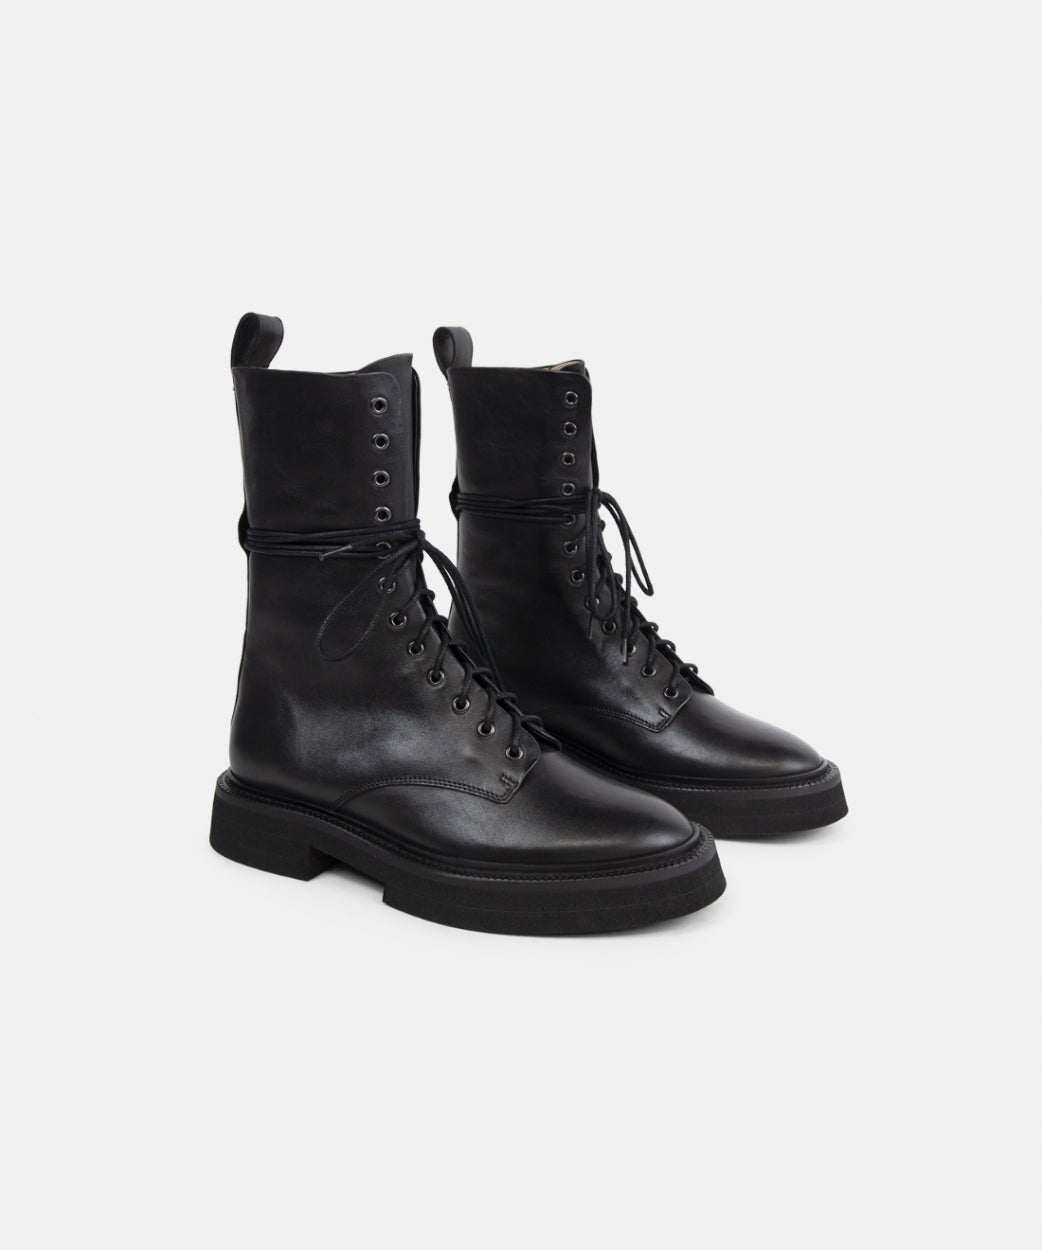 Women lace up boot